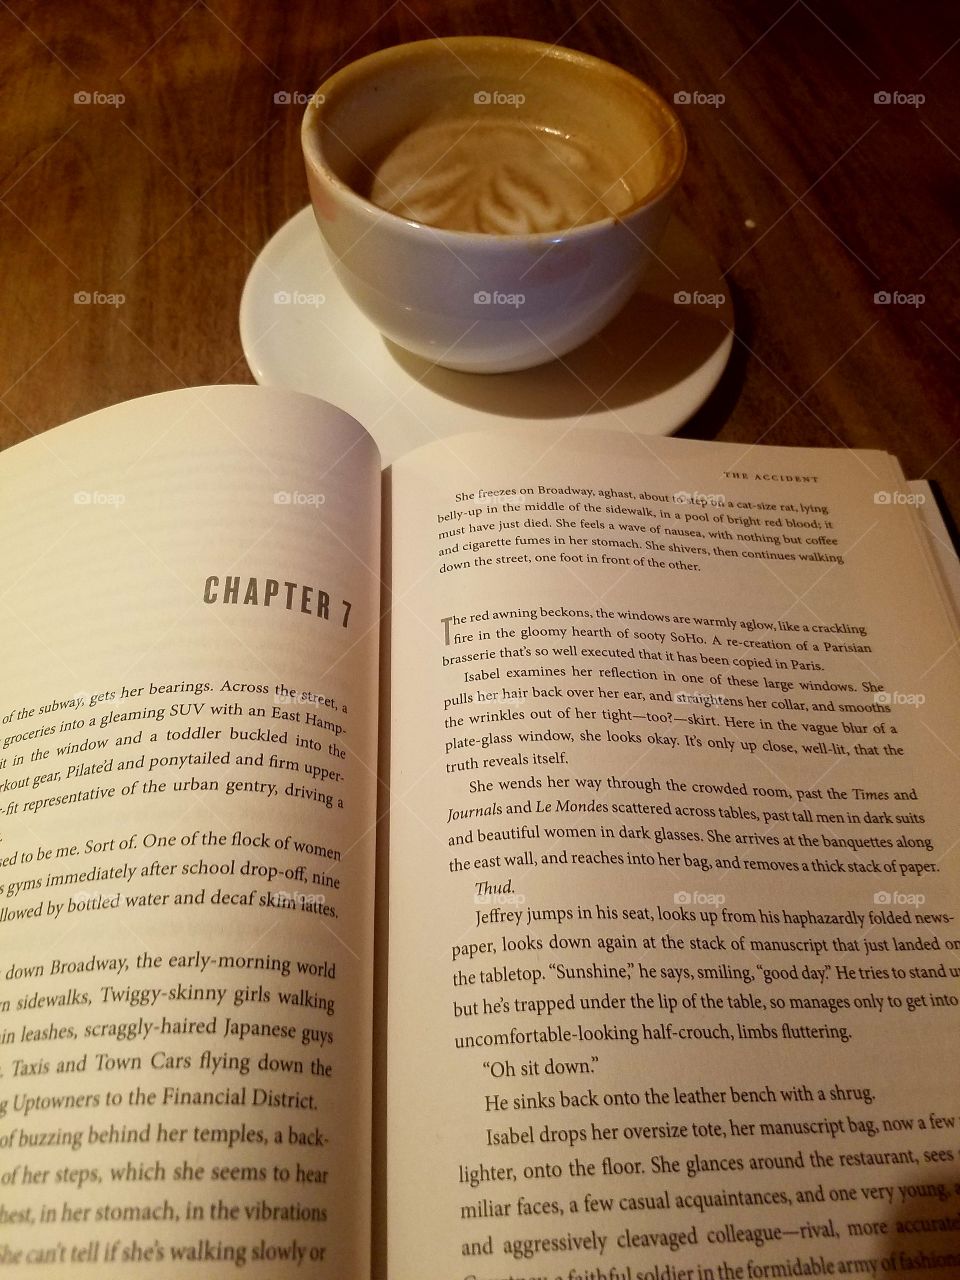 Reading and coffee on a rainy day with music. Makes the best day.